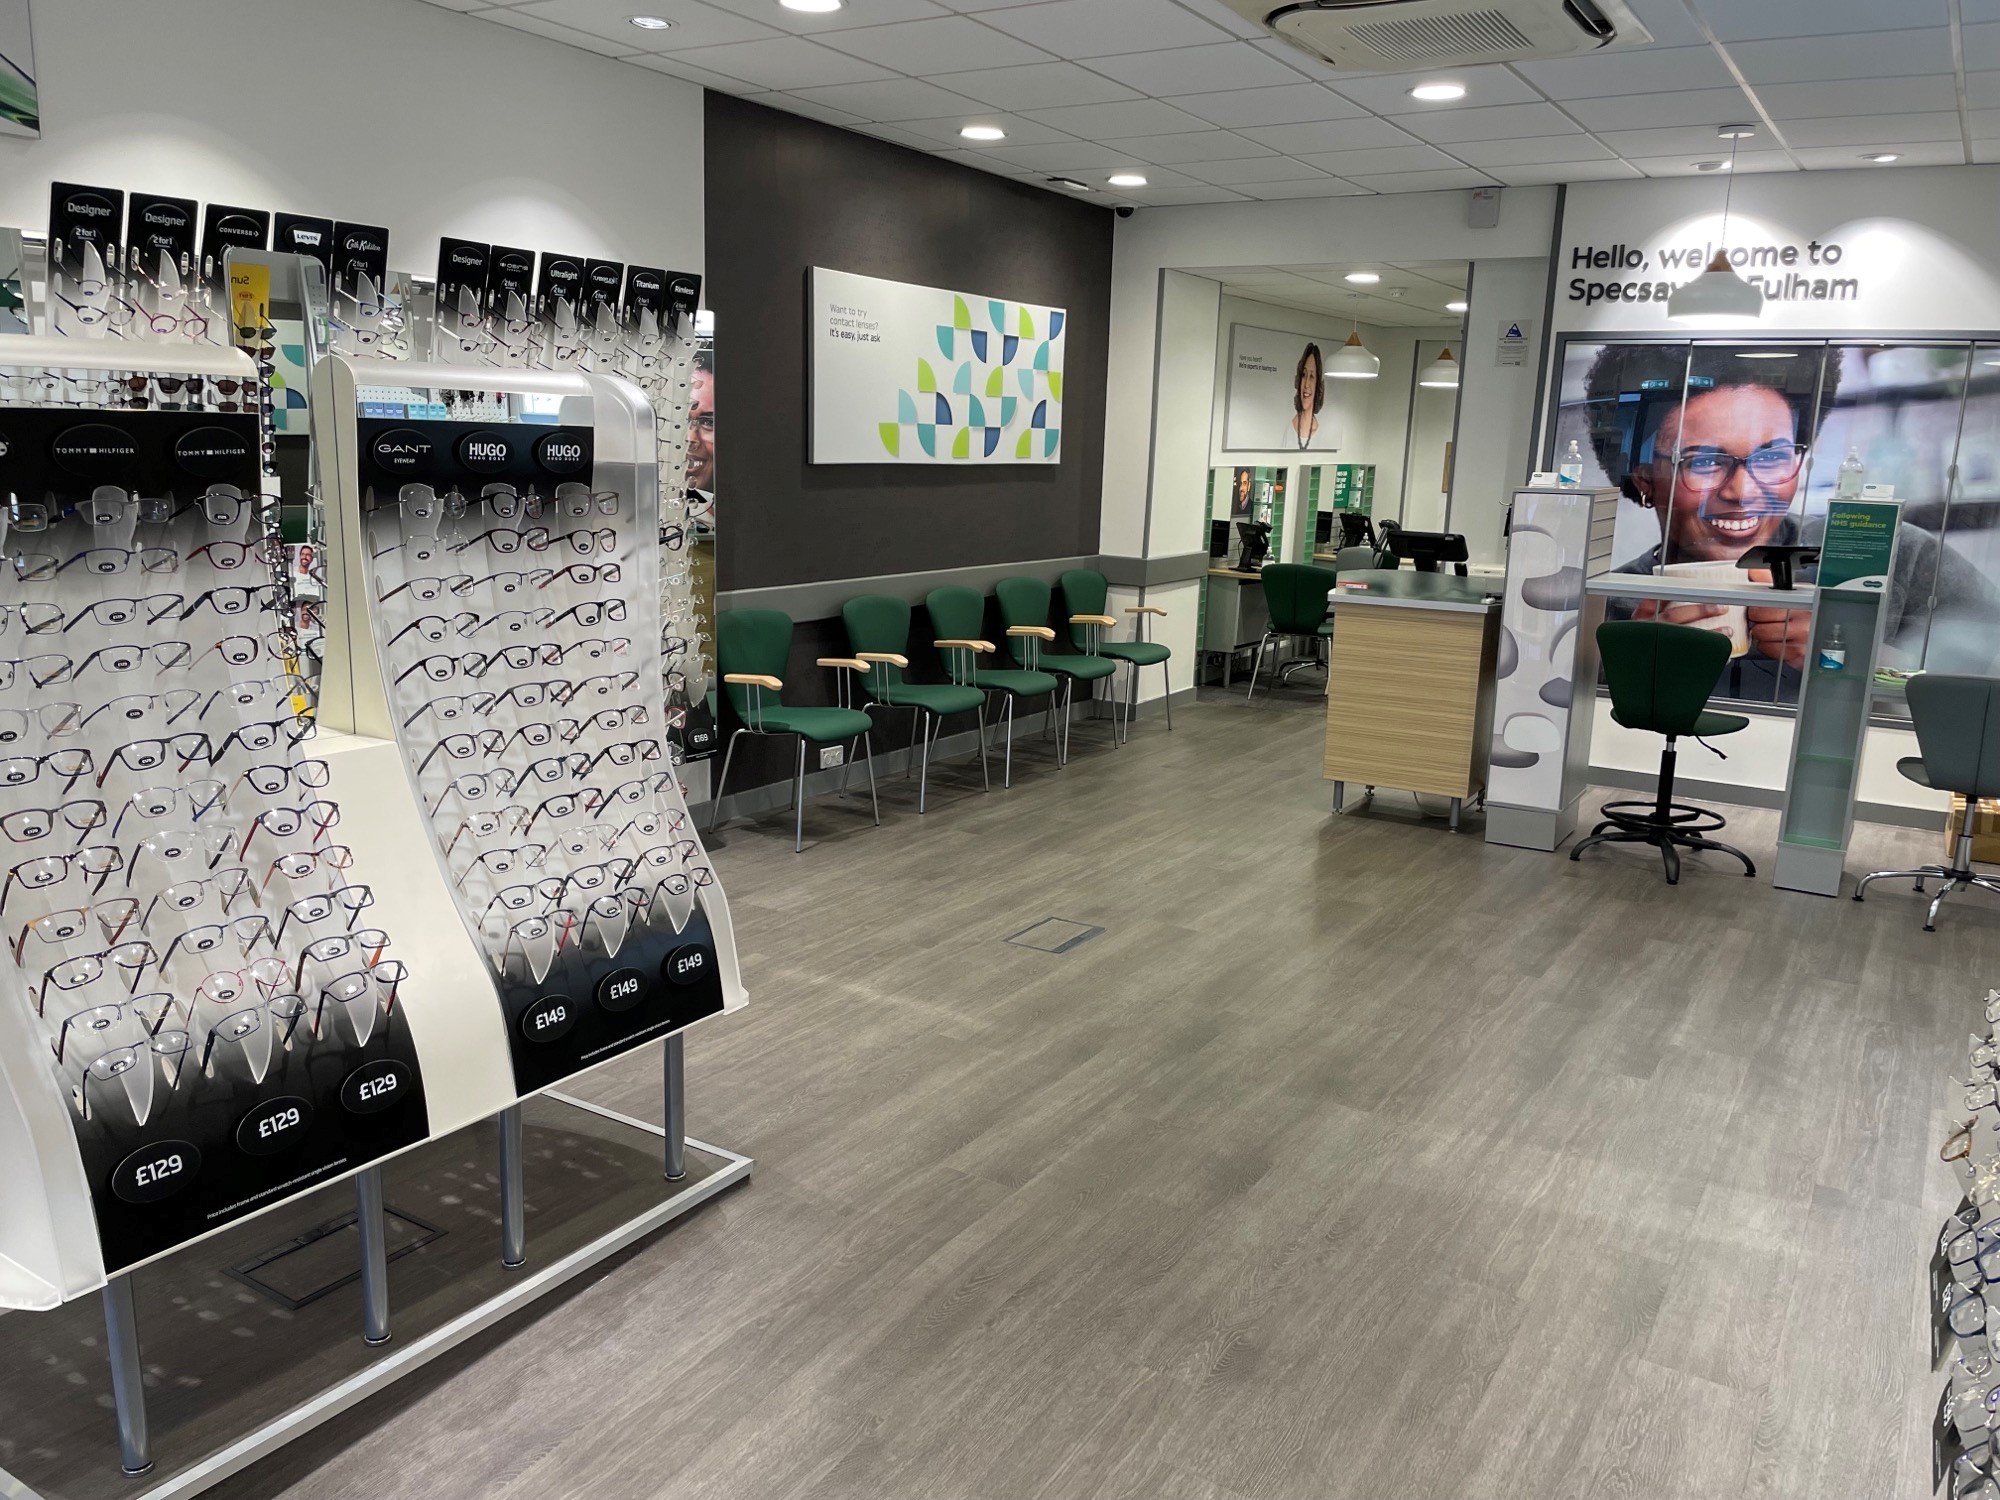 Specsavers Fulham Specsavers Opticians and Audiologists - Fulham Fulham 020 7471 0390